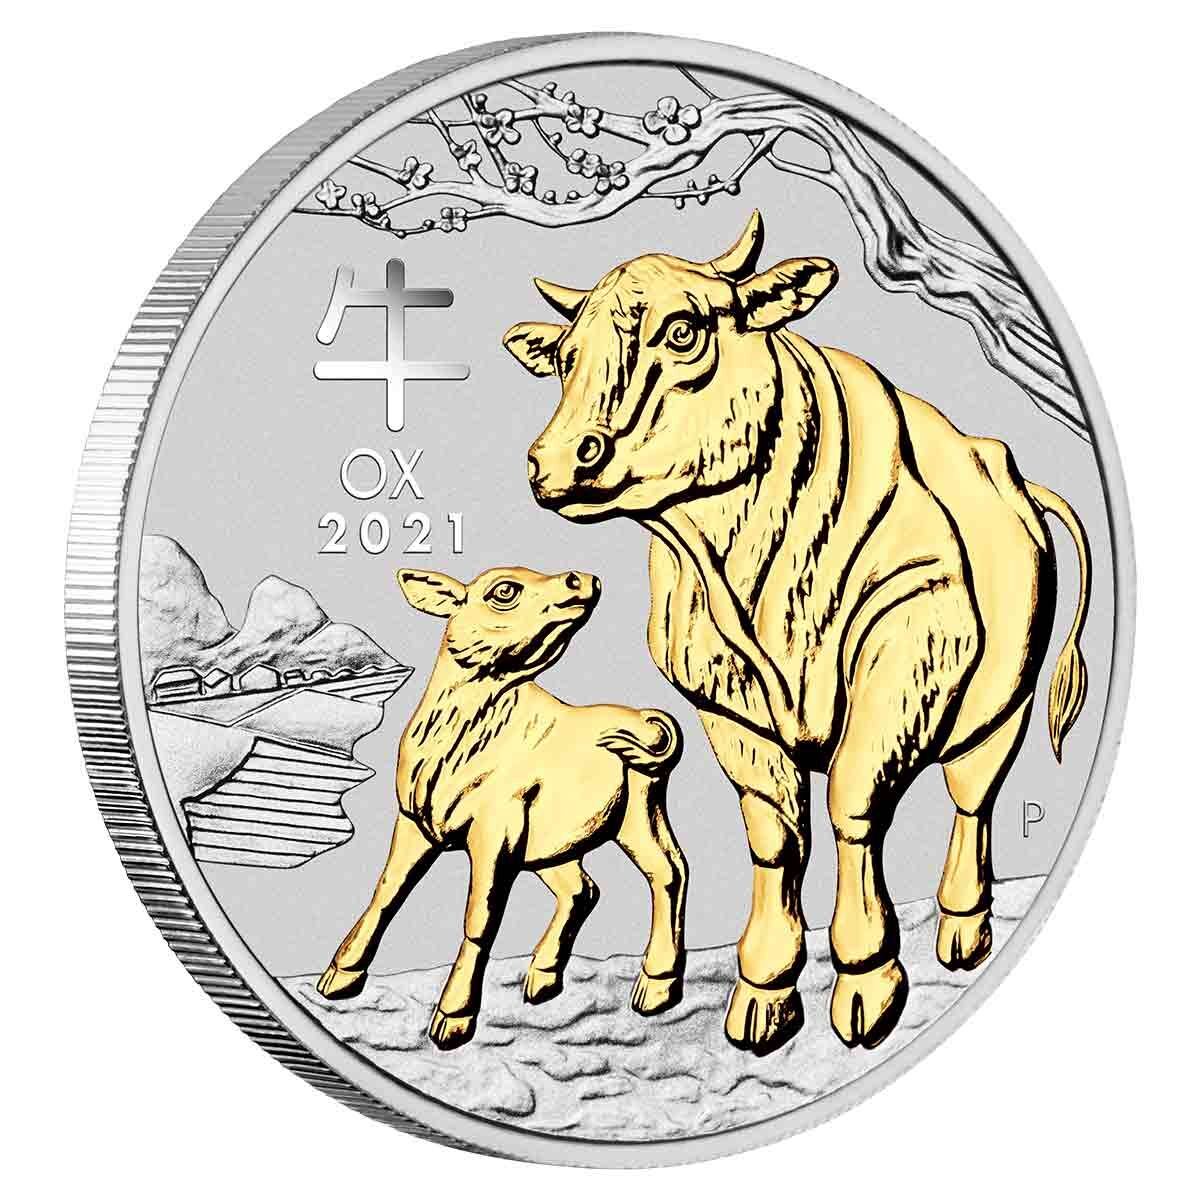 2021 $1 Year of the Ox Gold-Gilded 1oz Silver Brilliant Uncirculated Coin